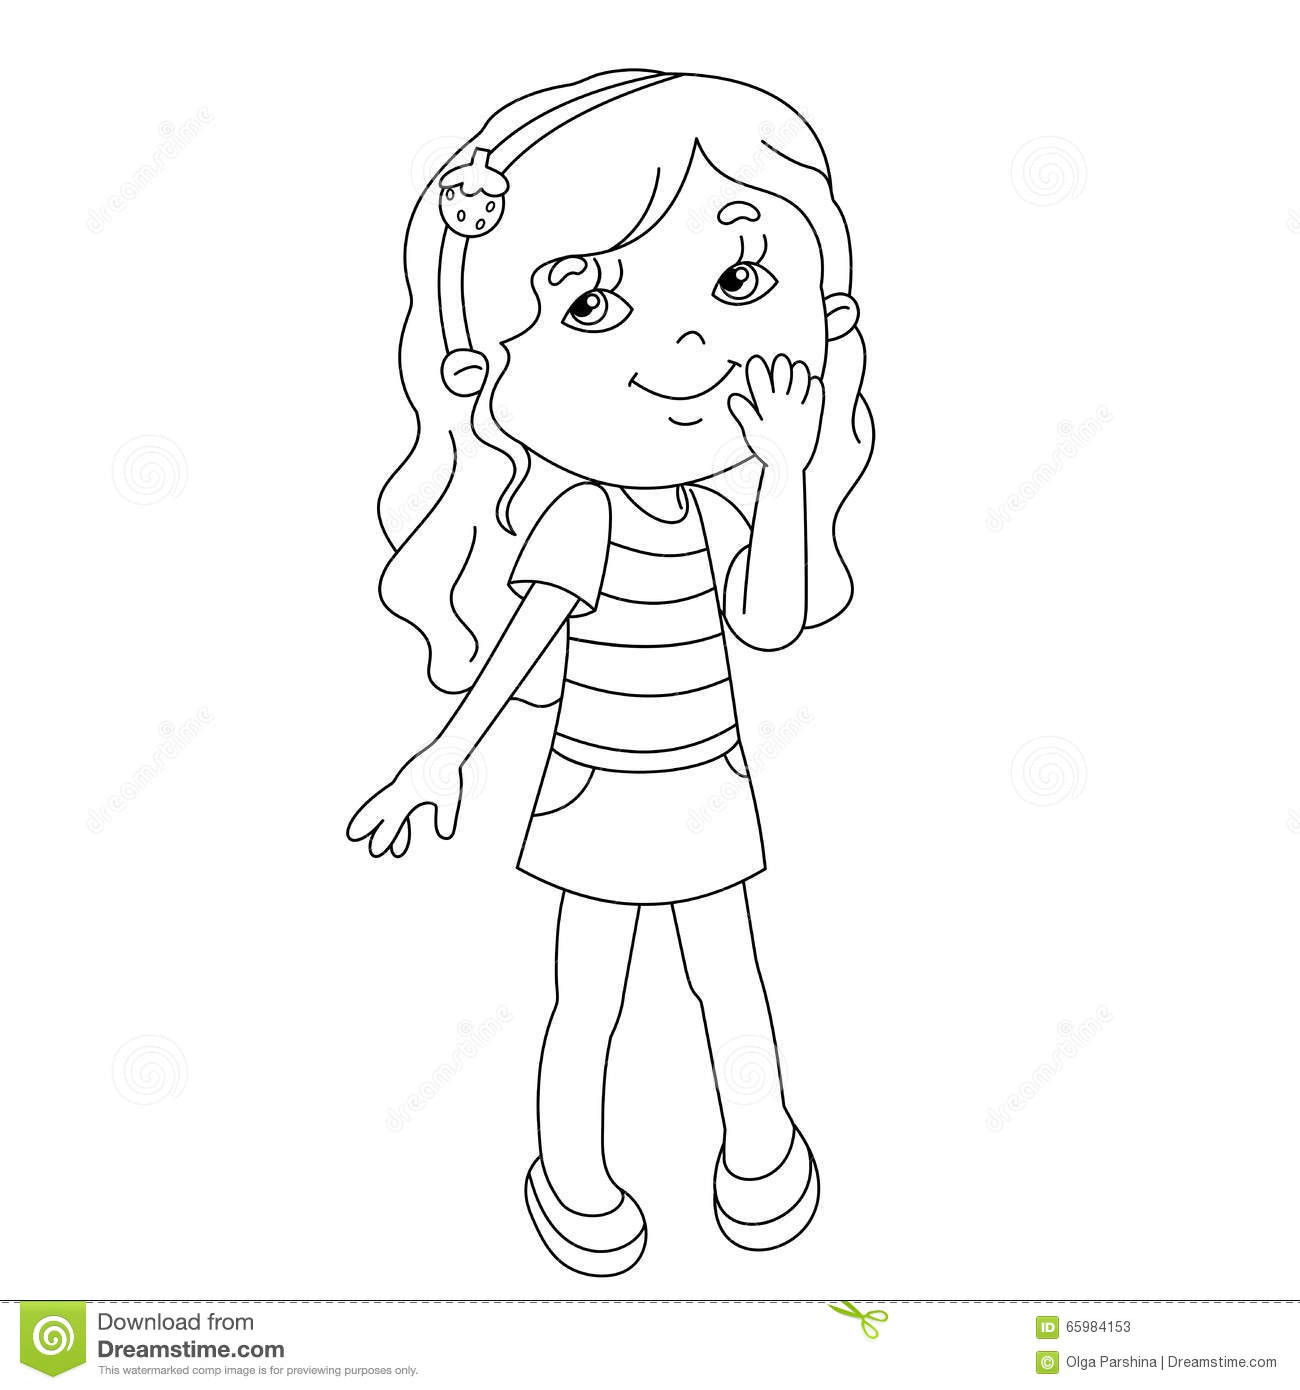 Girl Cartoon Coloring Pages
 Coloring Page Outline Cartoon Girl Stock Vector